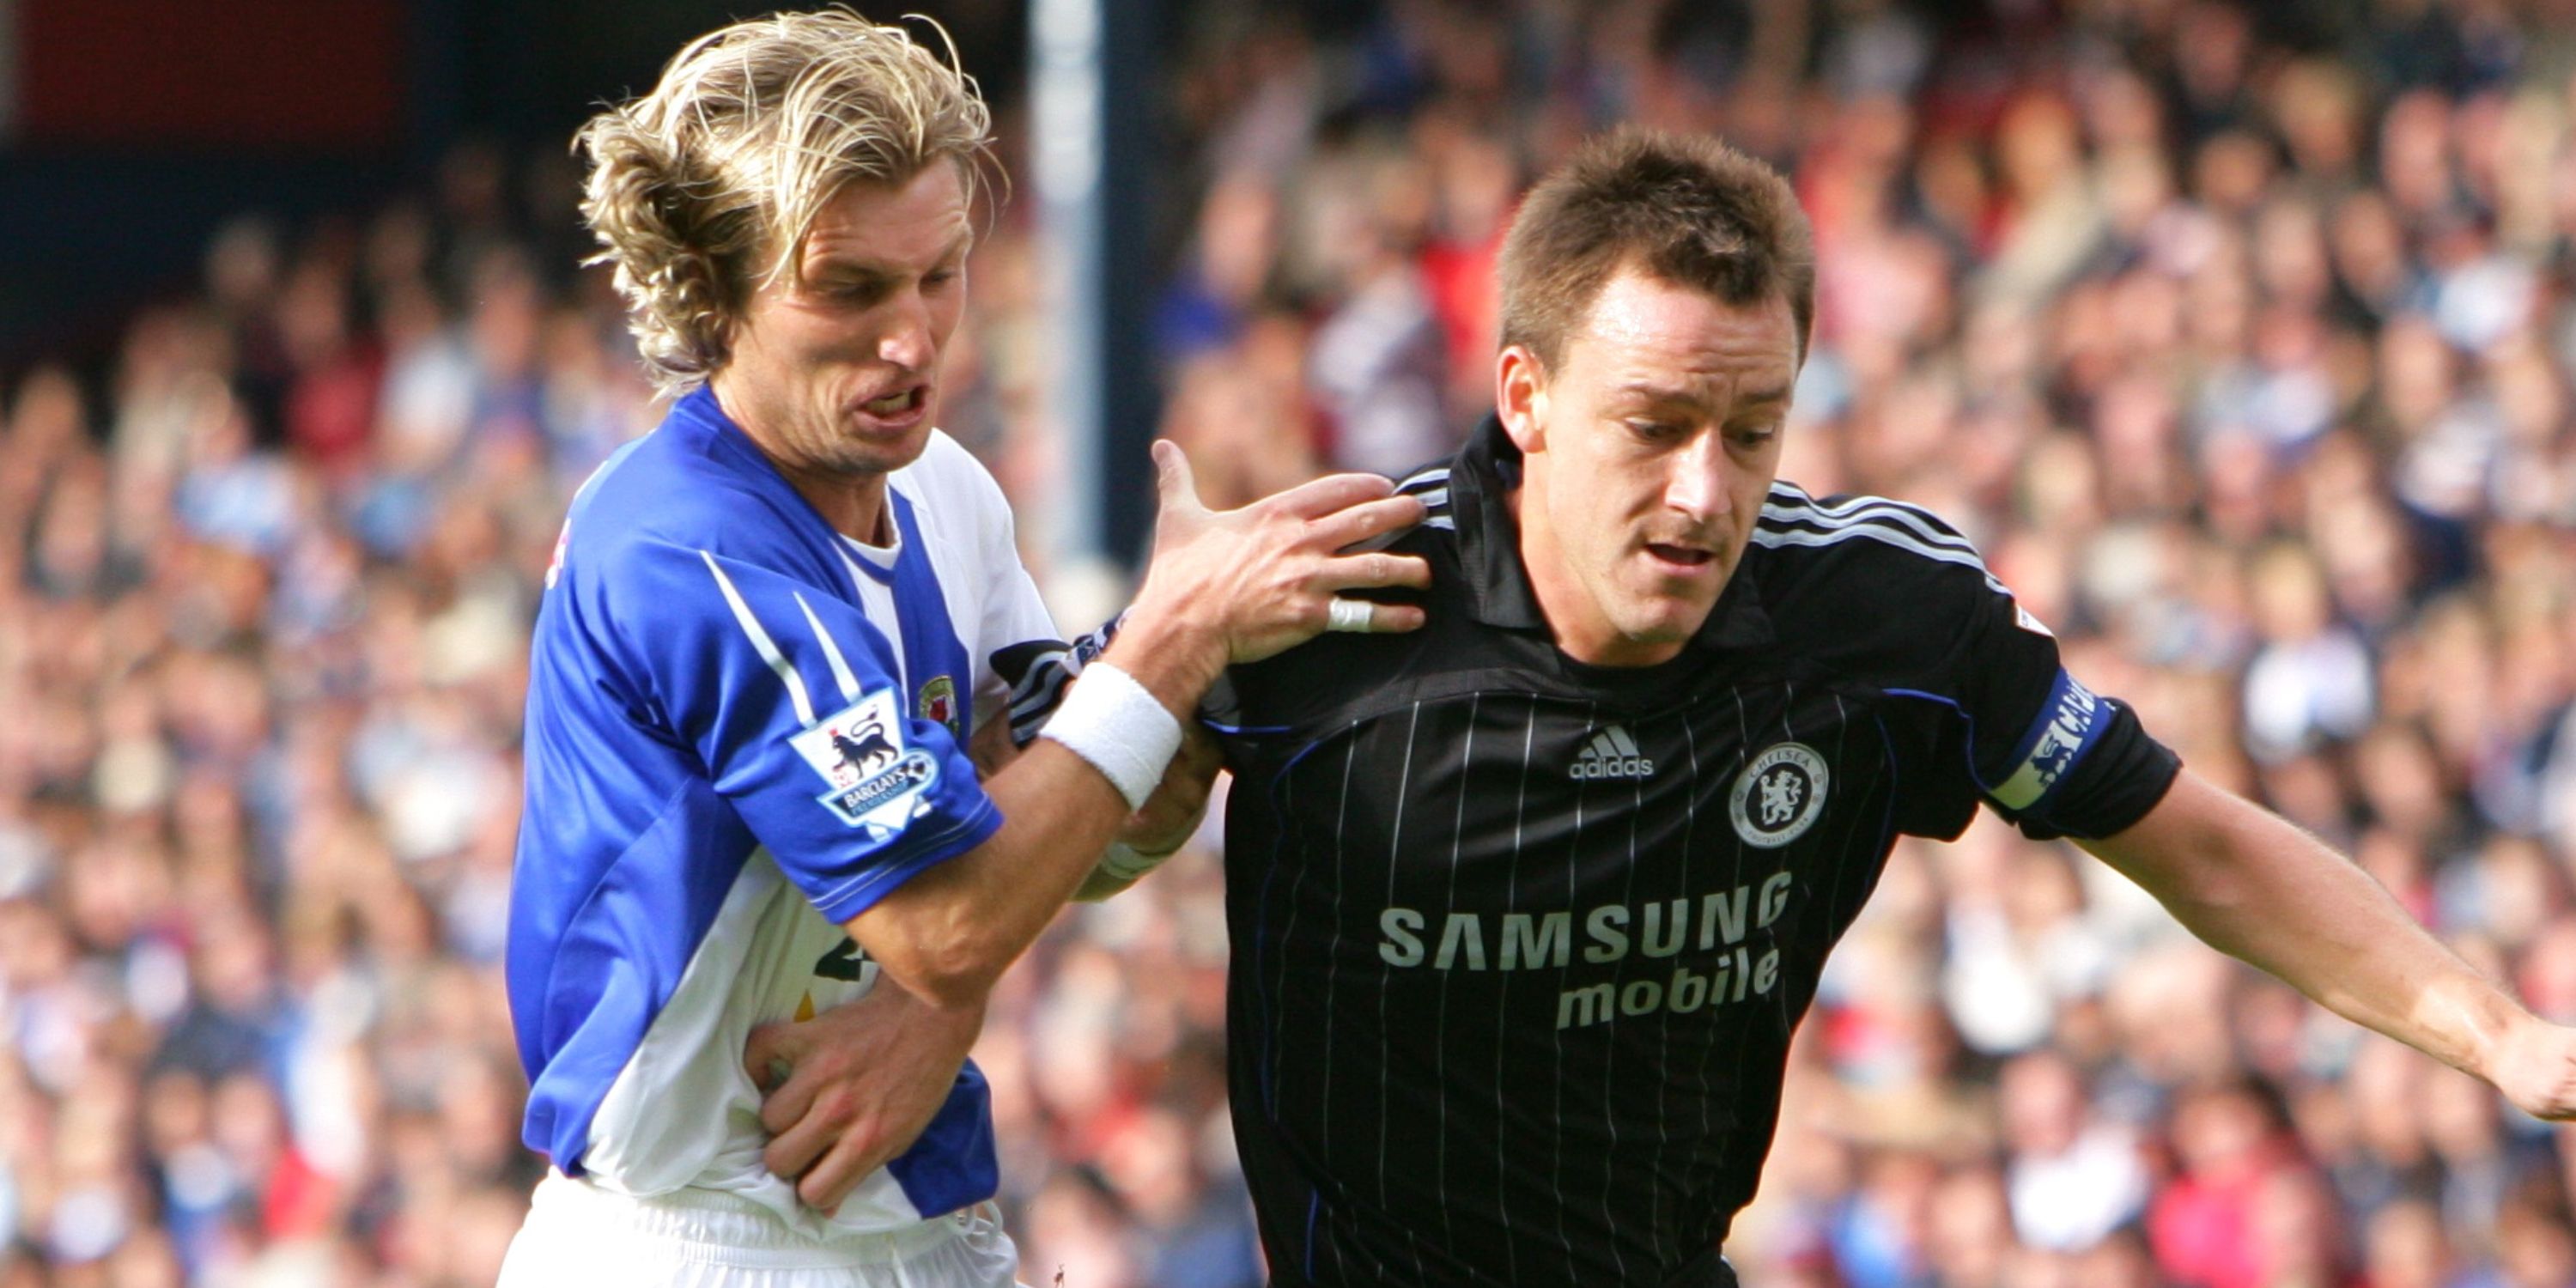 Robbie Savage and John Terry in action during Blackburn Rovers vs Chelsea